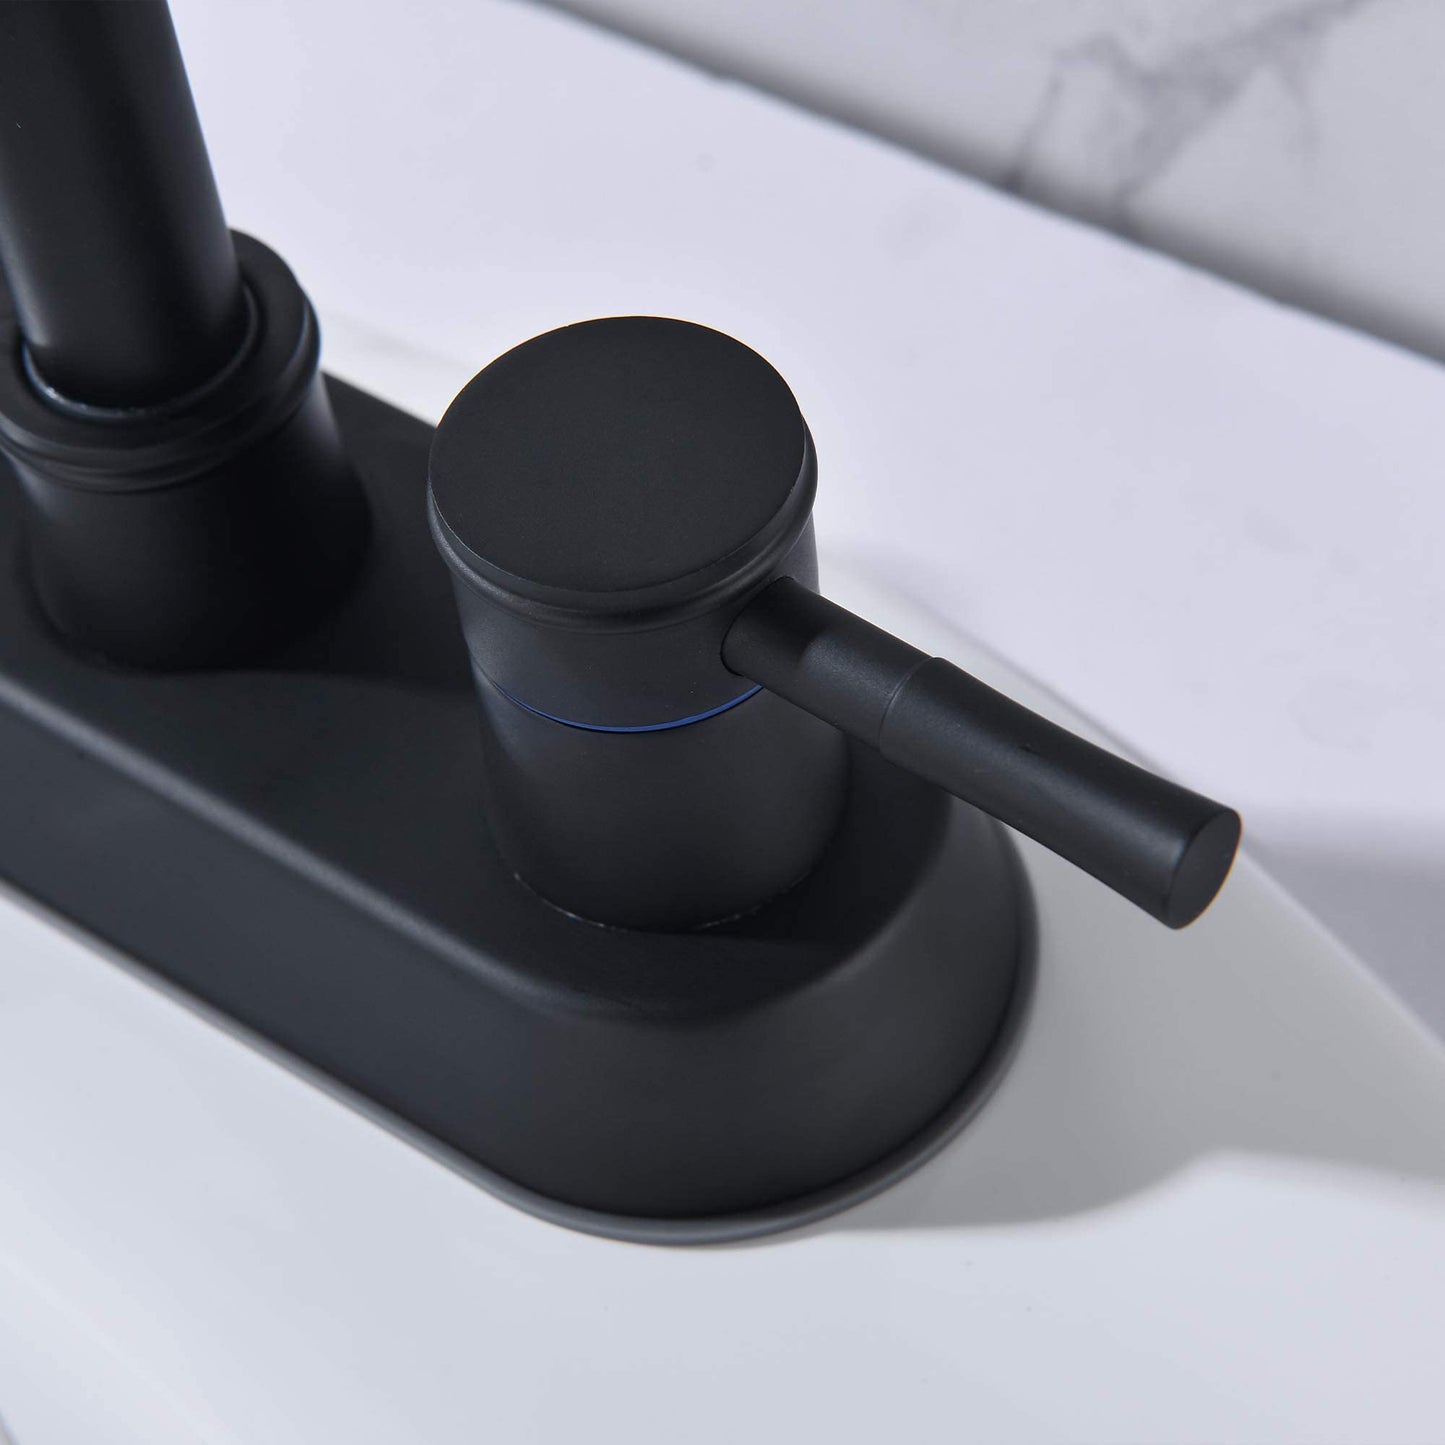 Stainless Steel Matte Black Bathroom Faucet Set with Pop-Up Sink Drain